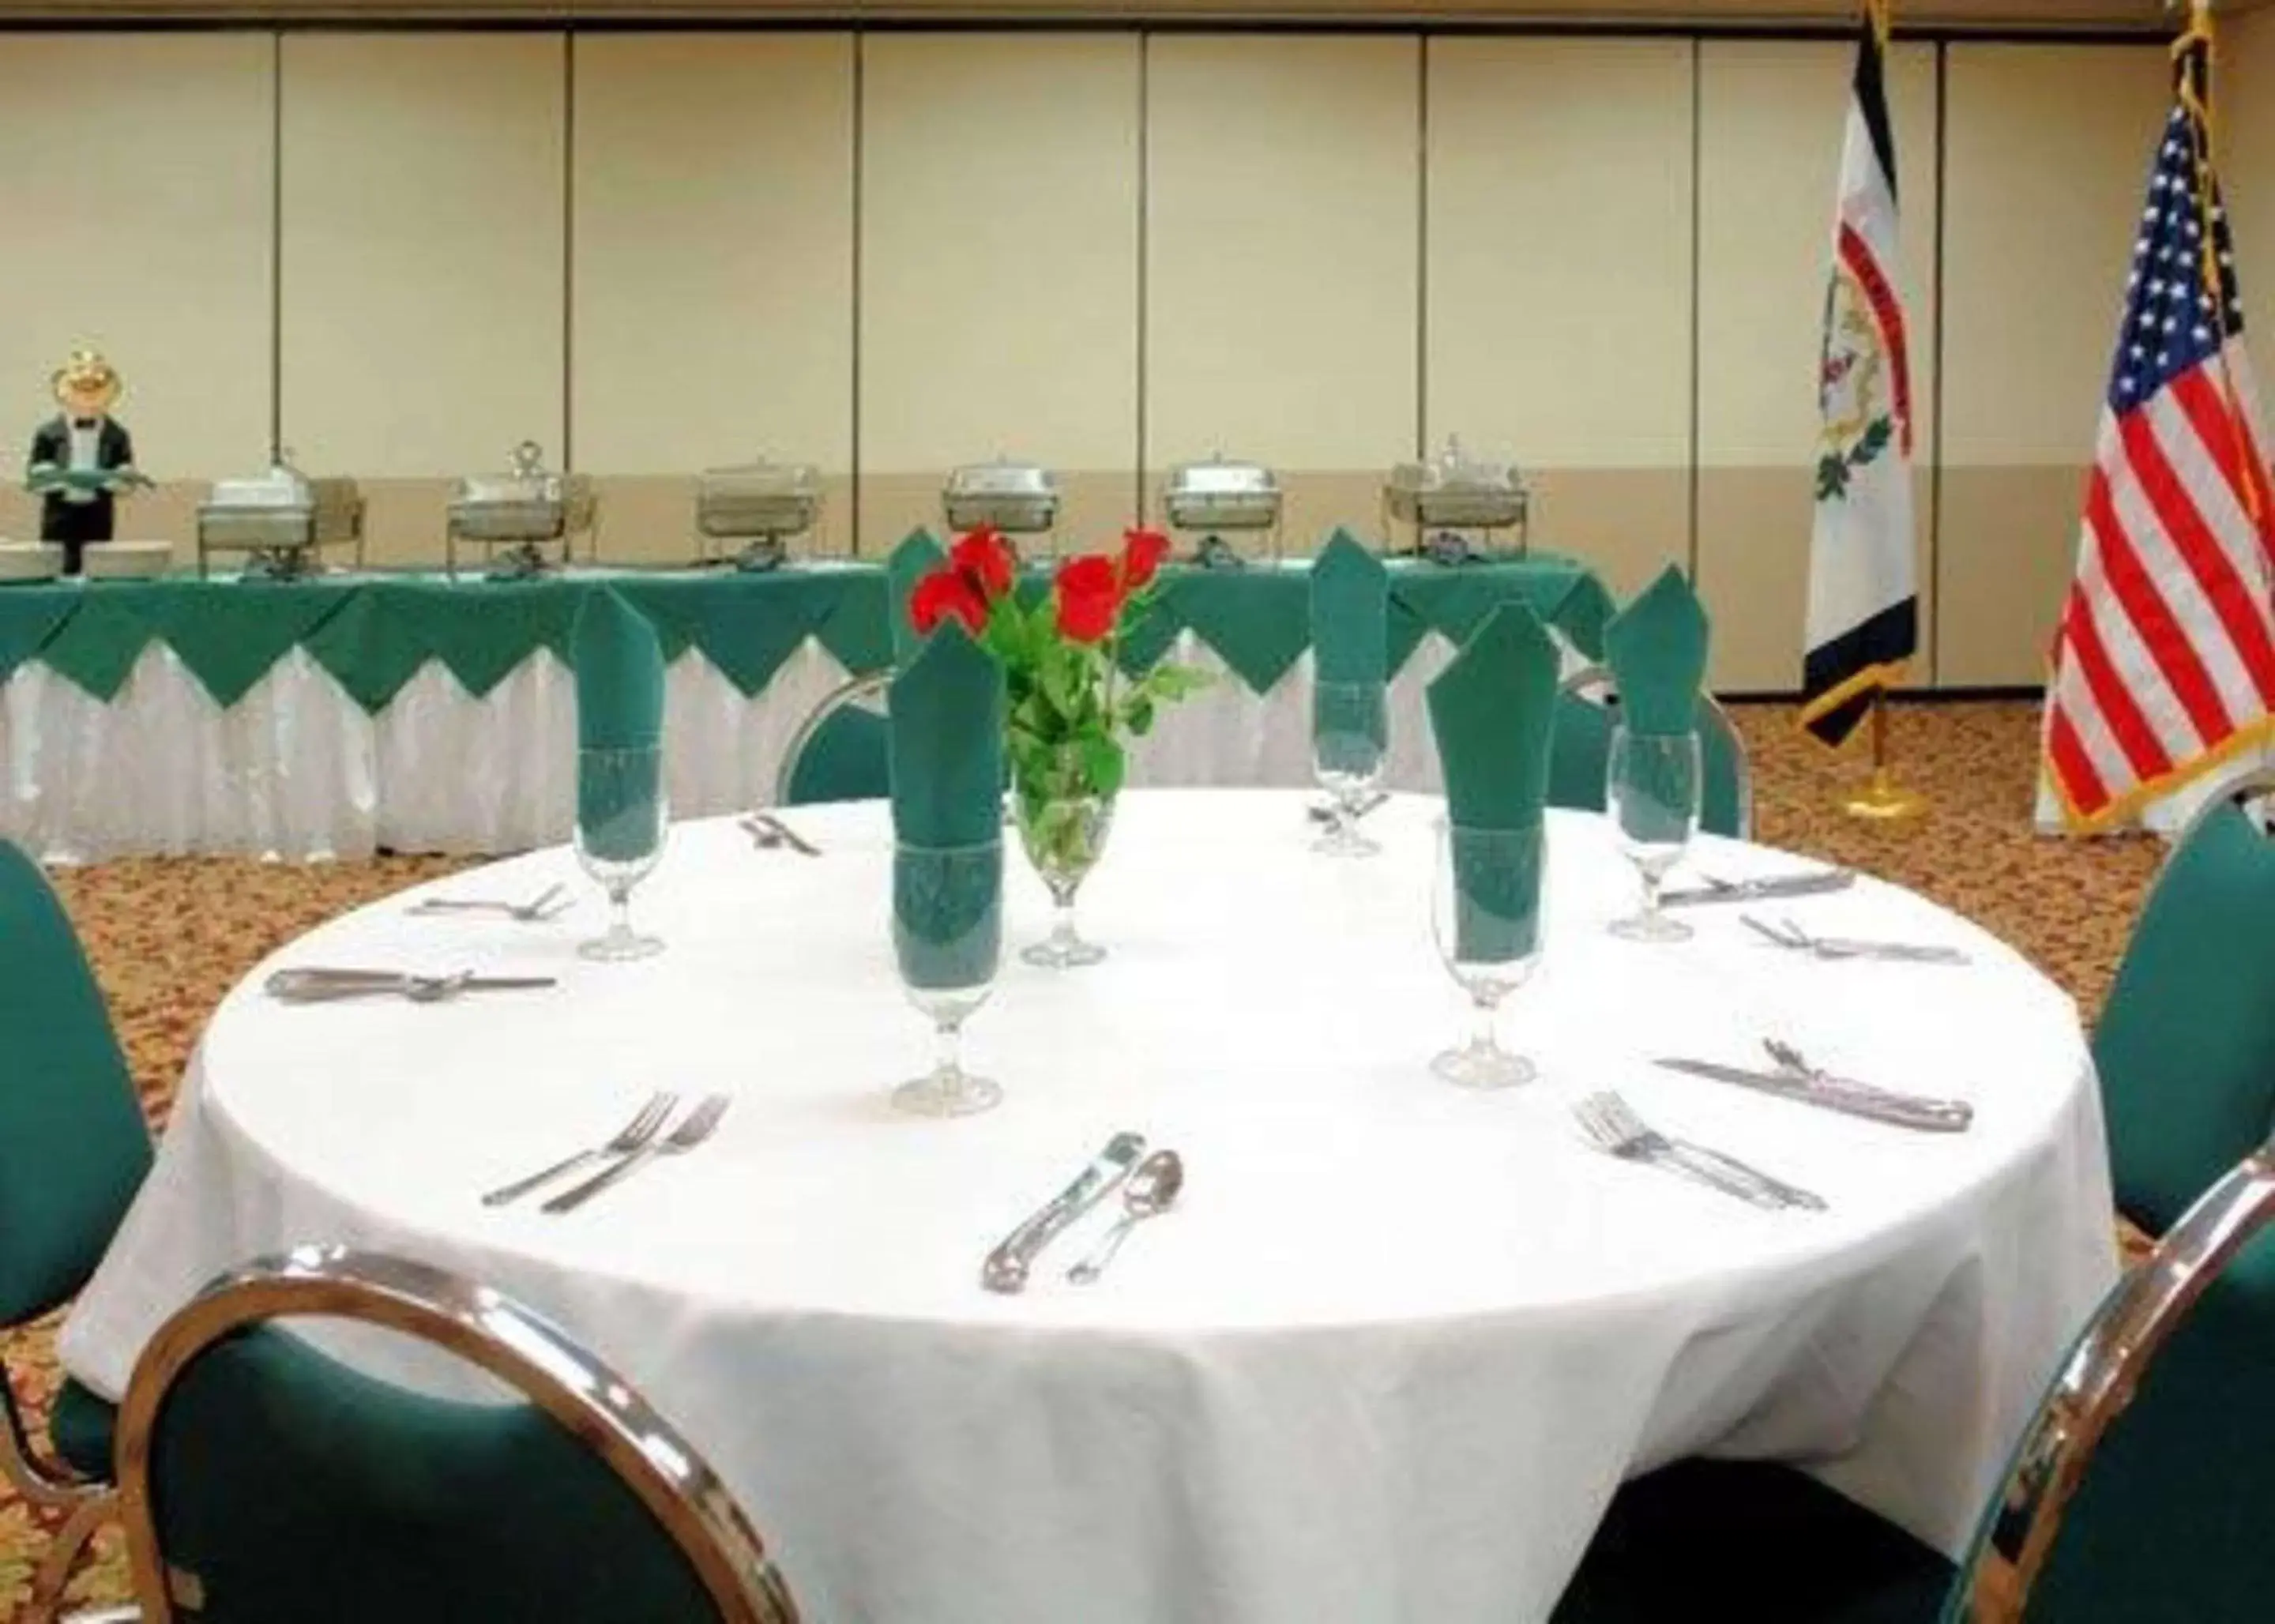 On site, Banquet Facilities in Quality Hotel and Conference Center